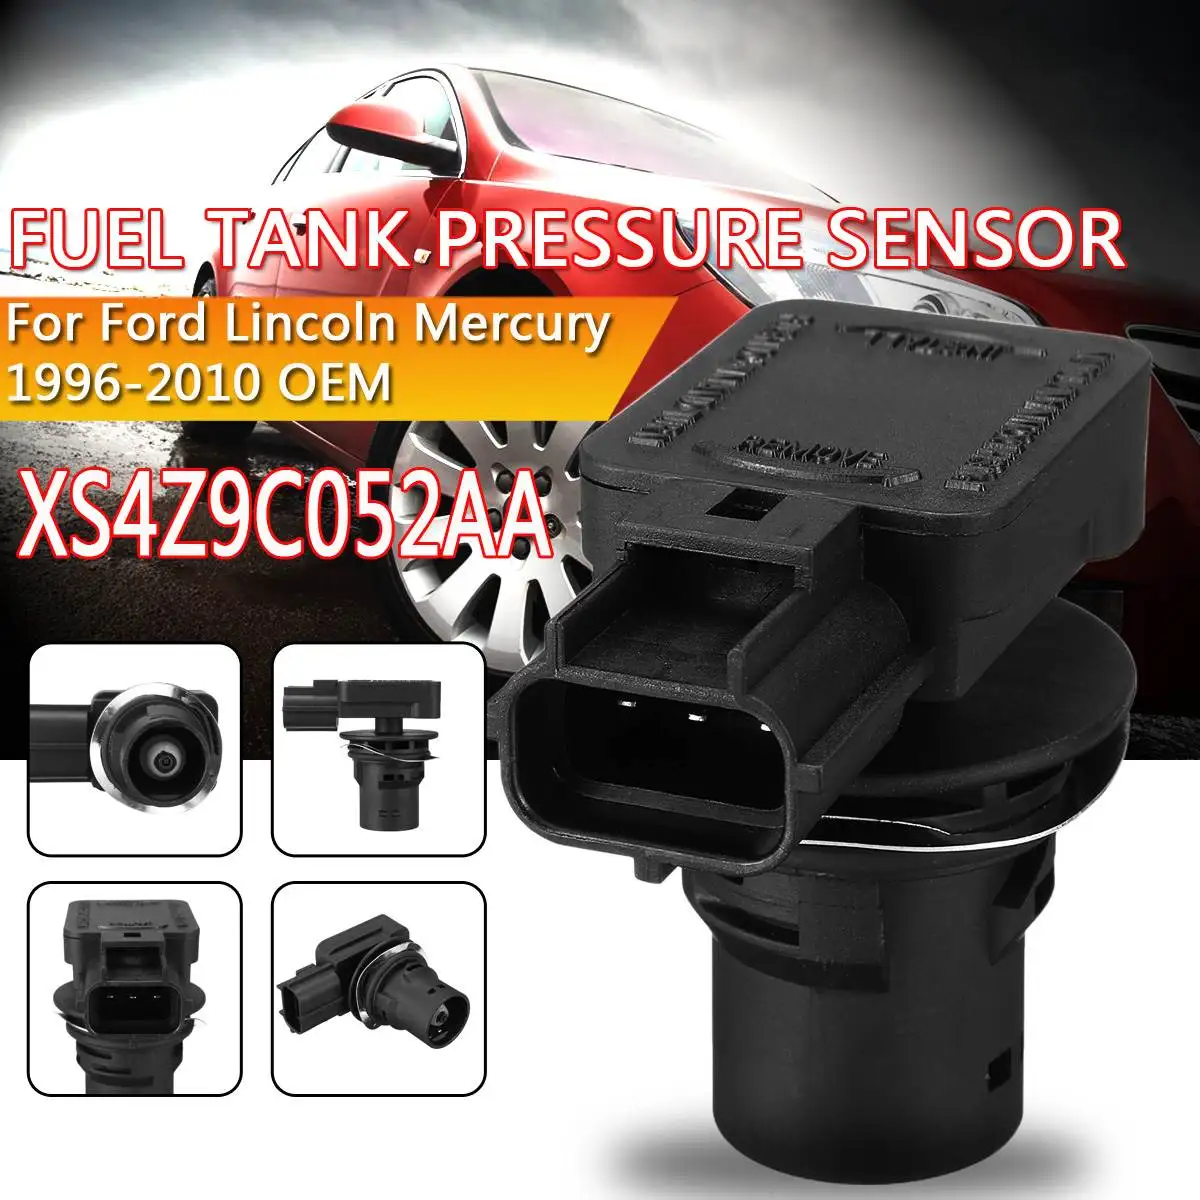 

F6DZ9C052CA XS4Z9C052AA Fuel Tank Gas Oil Tank Pressure Sensor For Ford F-150 F-250 F-350 for Mercury for Lincoln